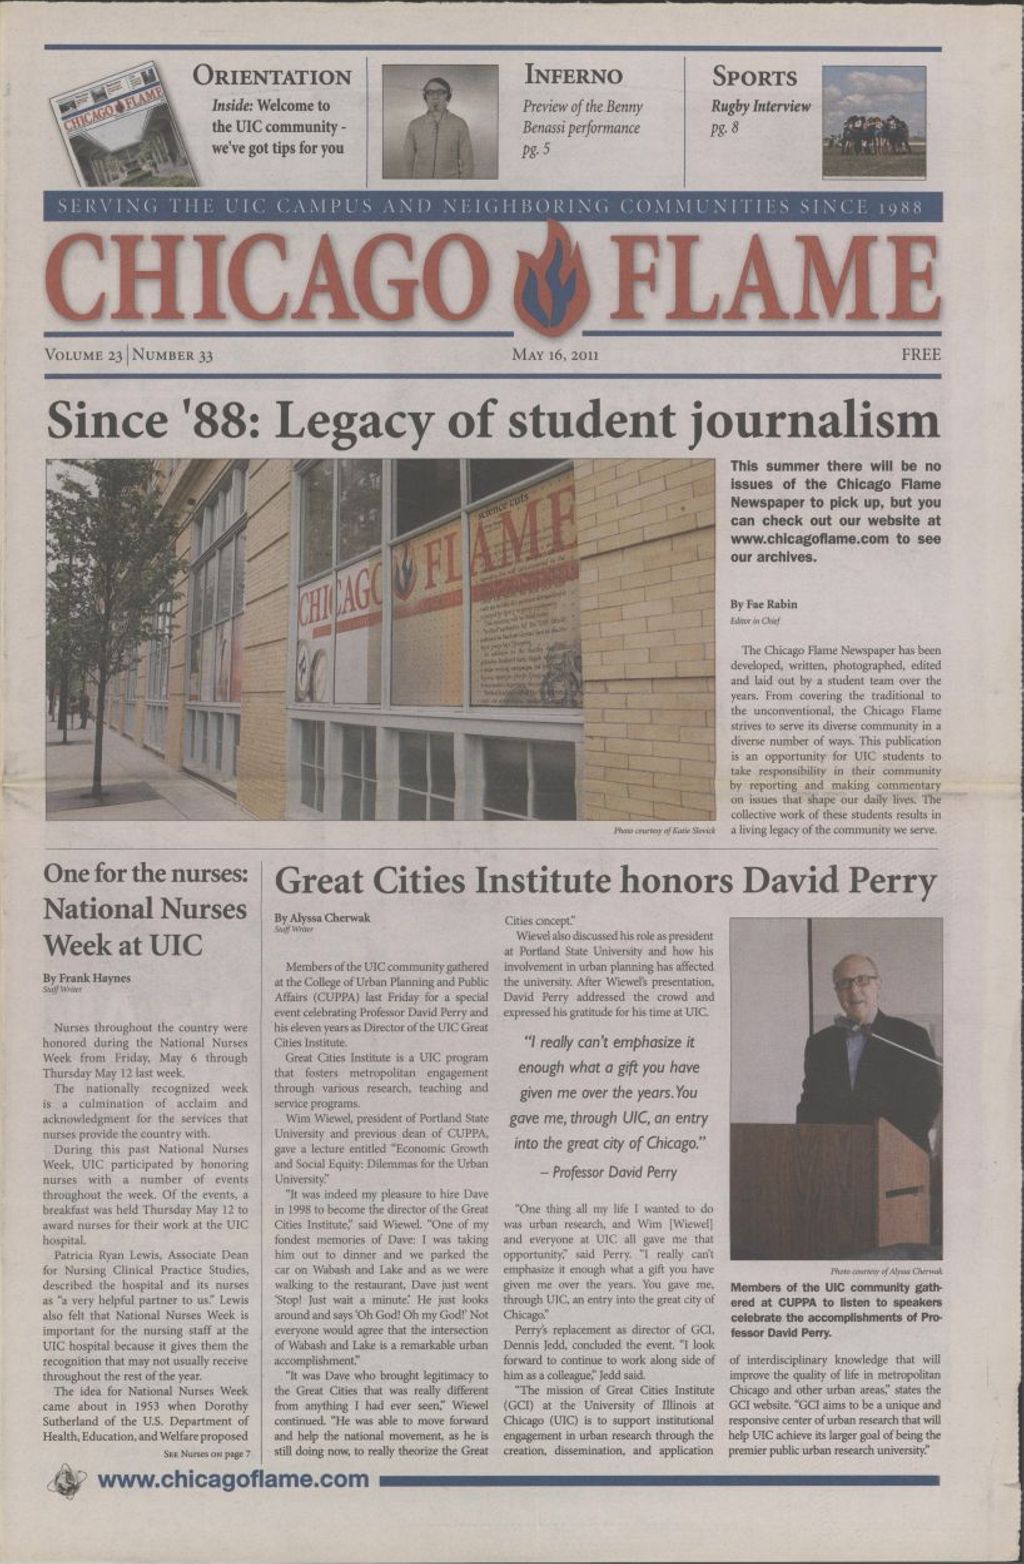 Chicago Flame (May 16, 2011)